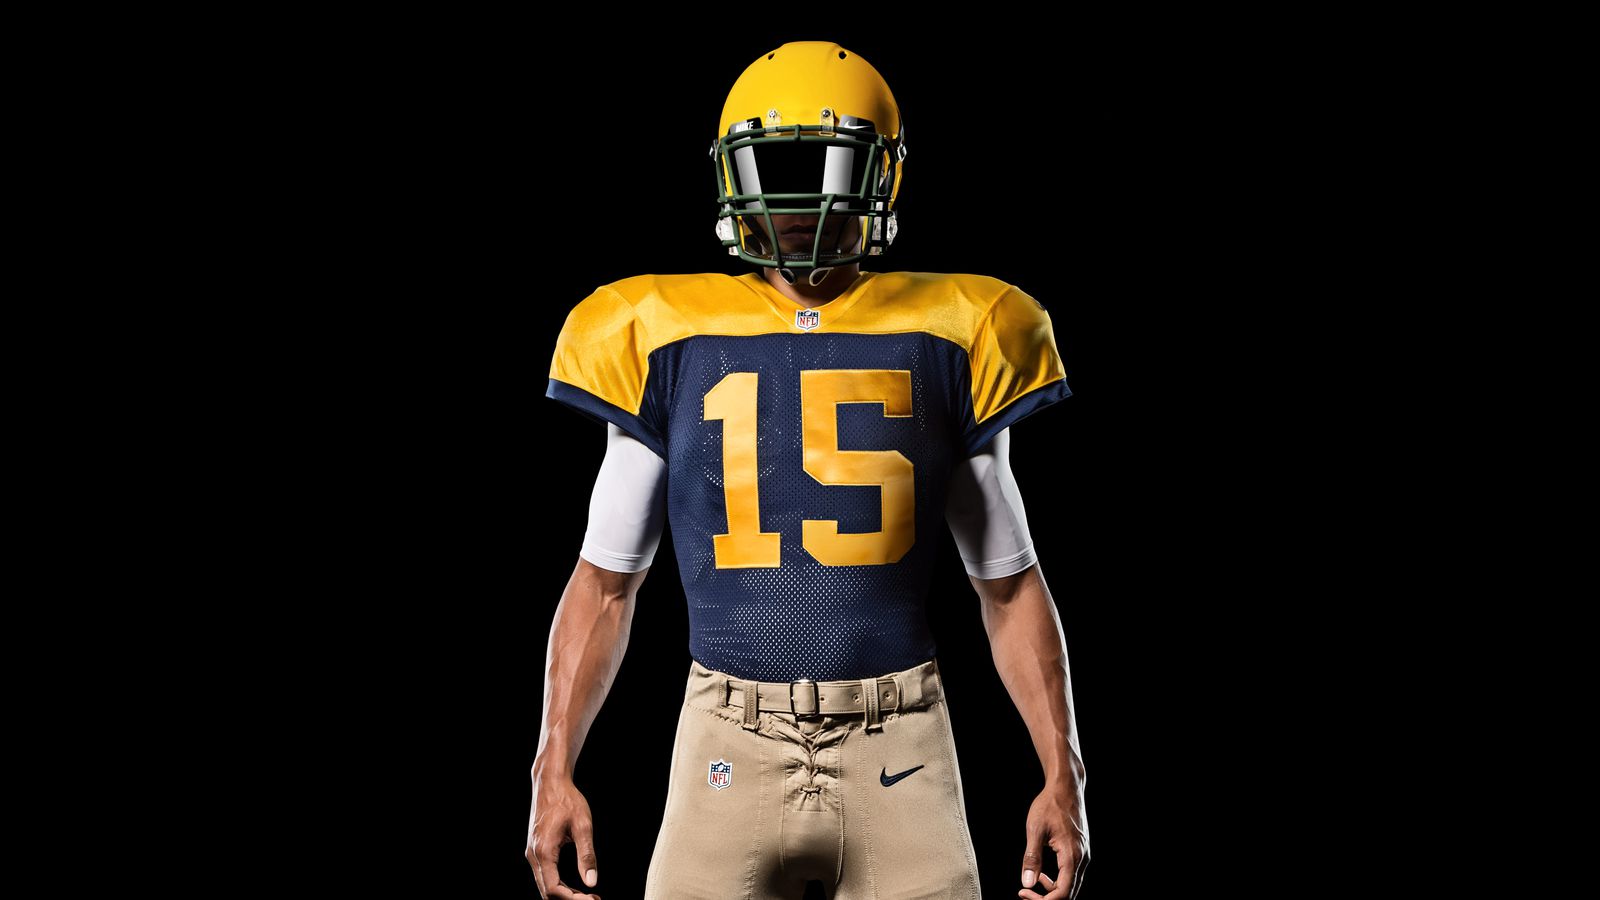 Packers Throwback Jersey: New 'Classic' uniforms on display in week 6 vs.  Chargers - Acme Packing Company